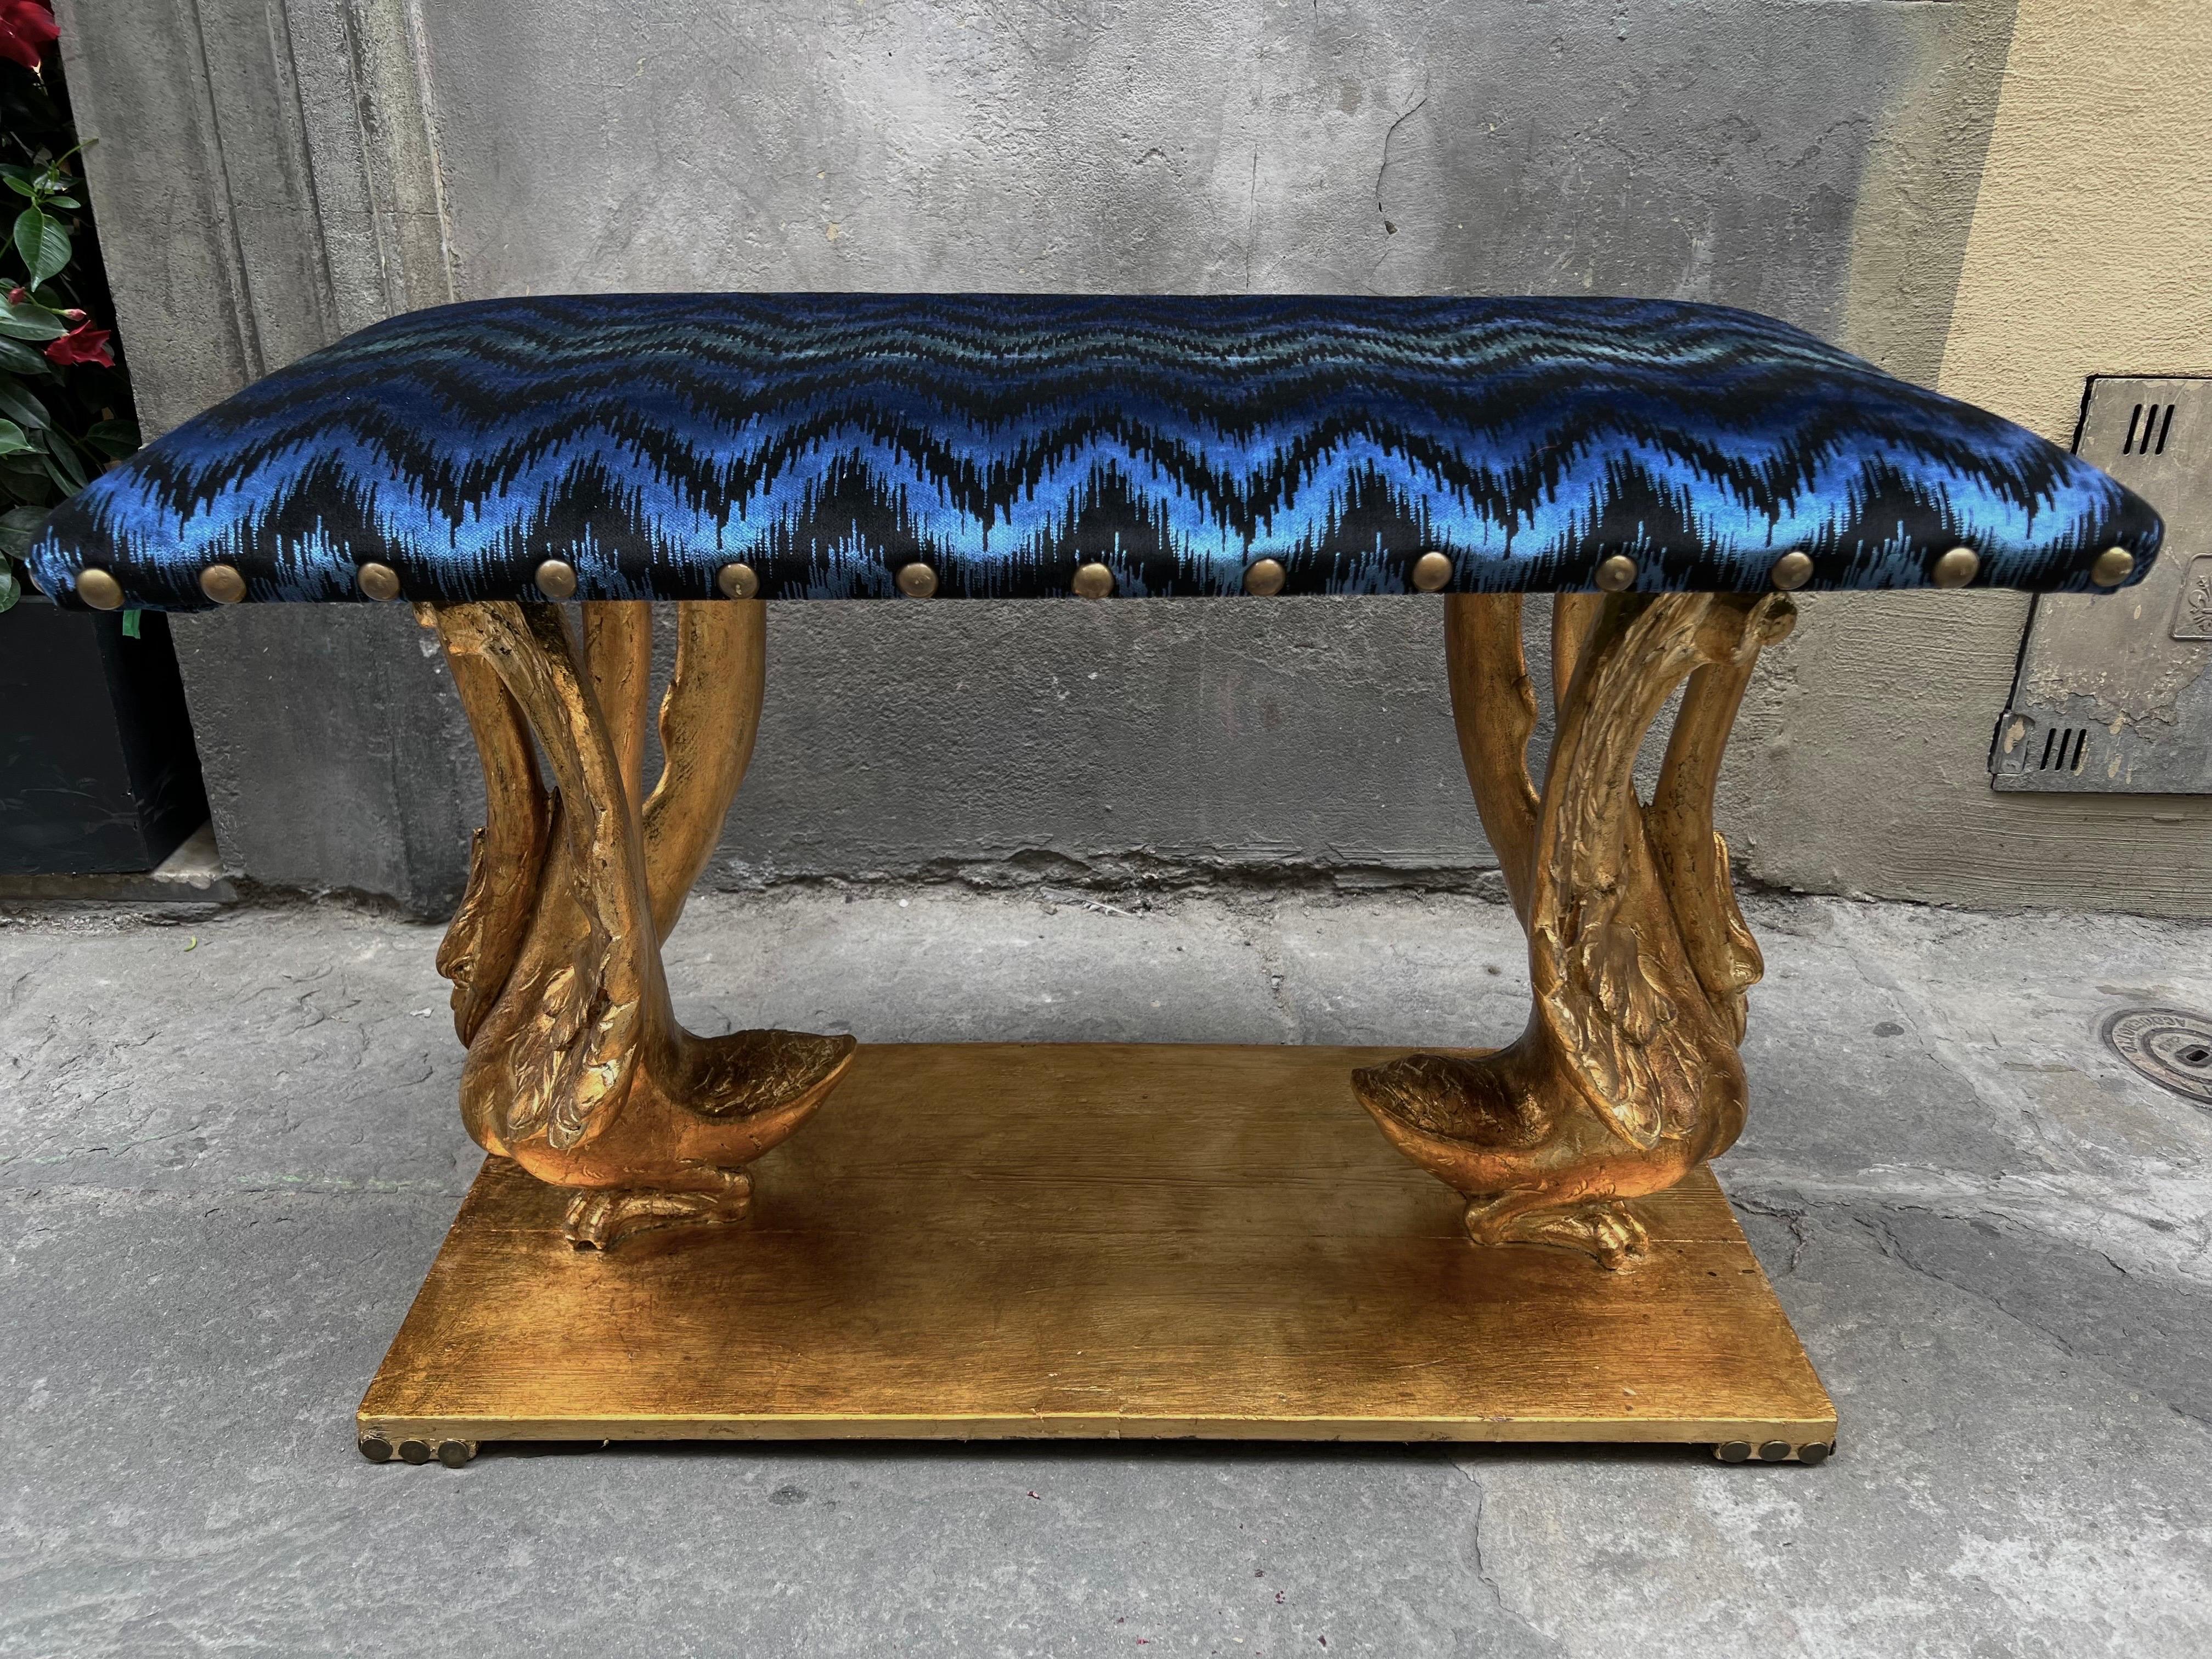 Italian gilt wood Swans bench, Renaissance style, Early '900
The swan-shaped sculptures are in hand-inlaid and gilded wood.
The seat is newly upholstered in velvet with blue tones with geometric design.